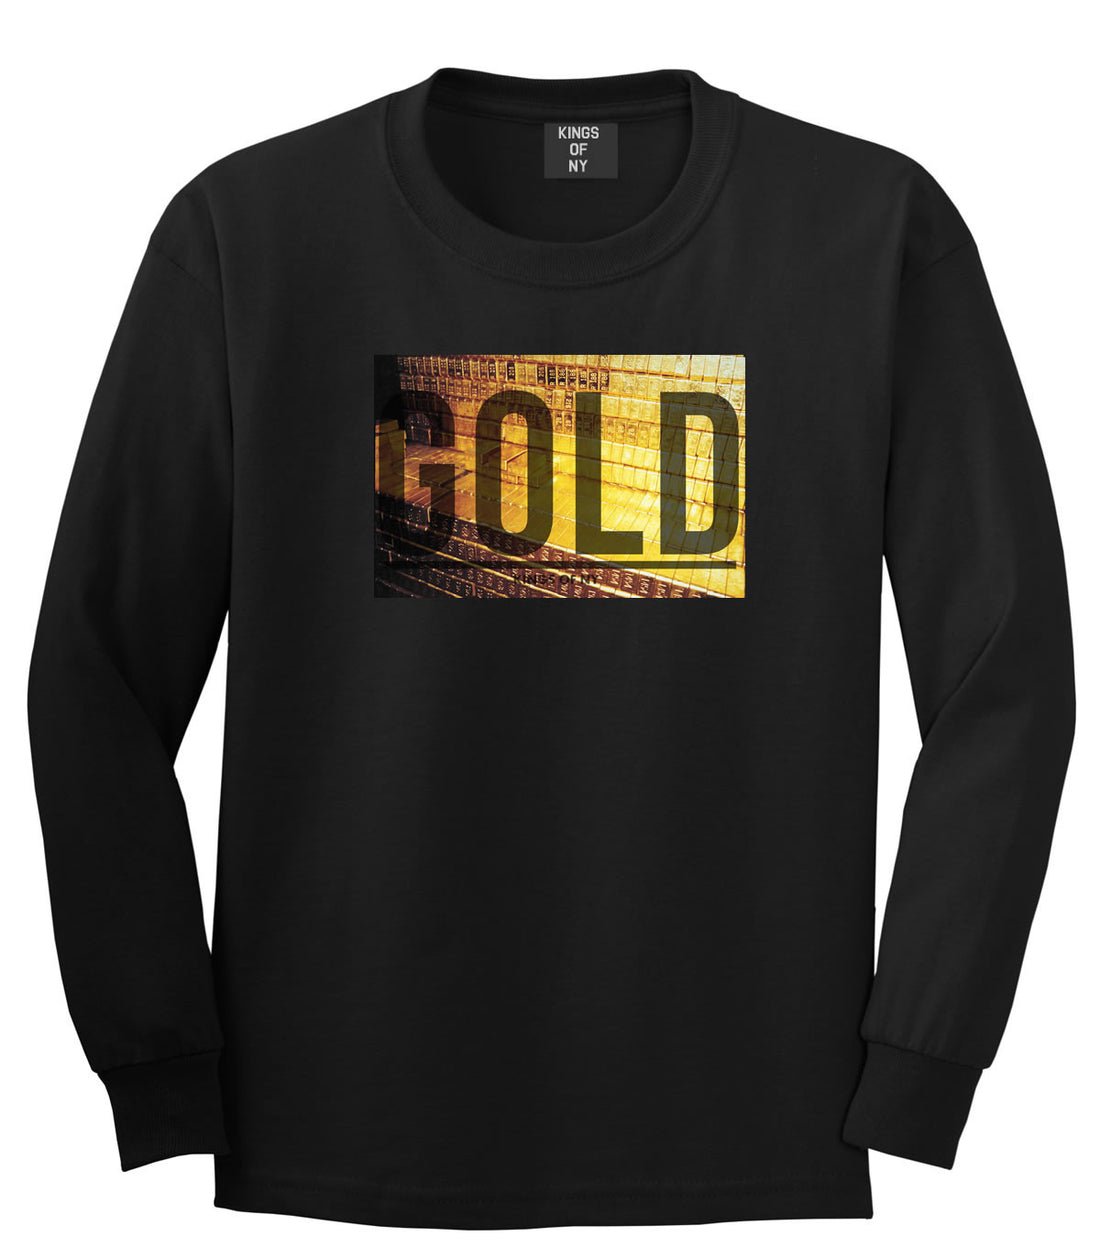 Gold Bricks Money Luxury Bank Cash Long Sleeve T-Shirt In Black by Kings Of NY